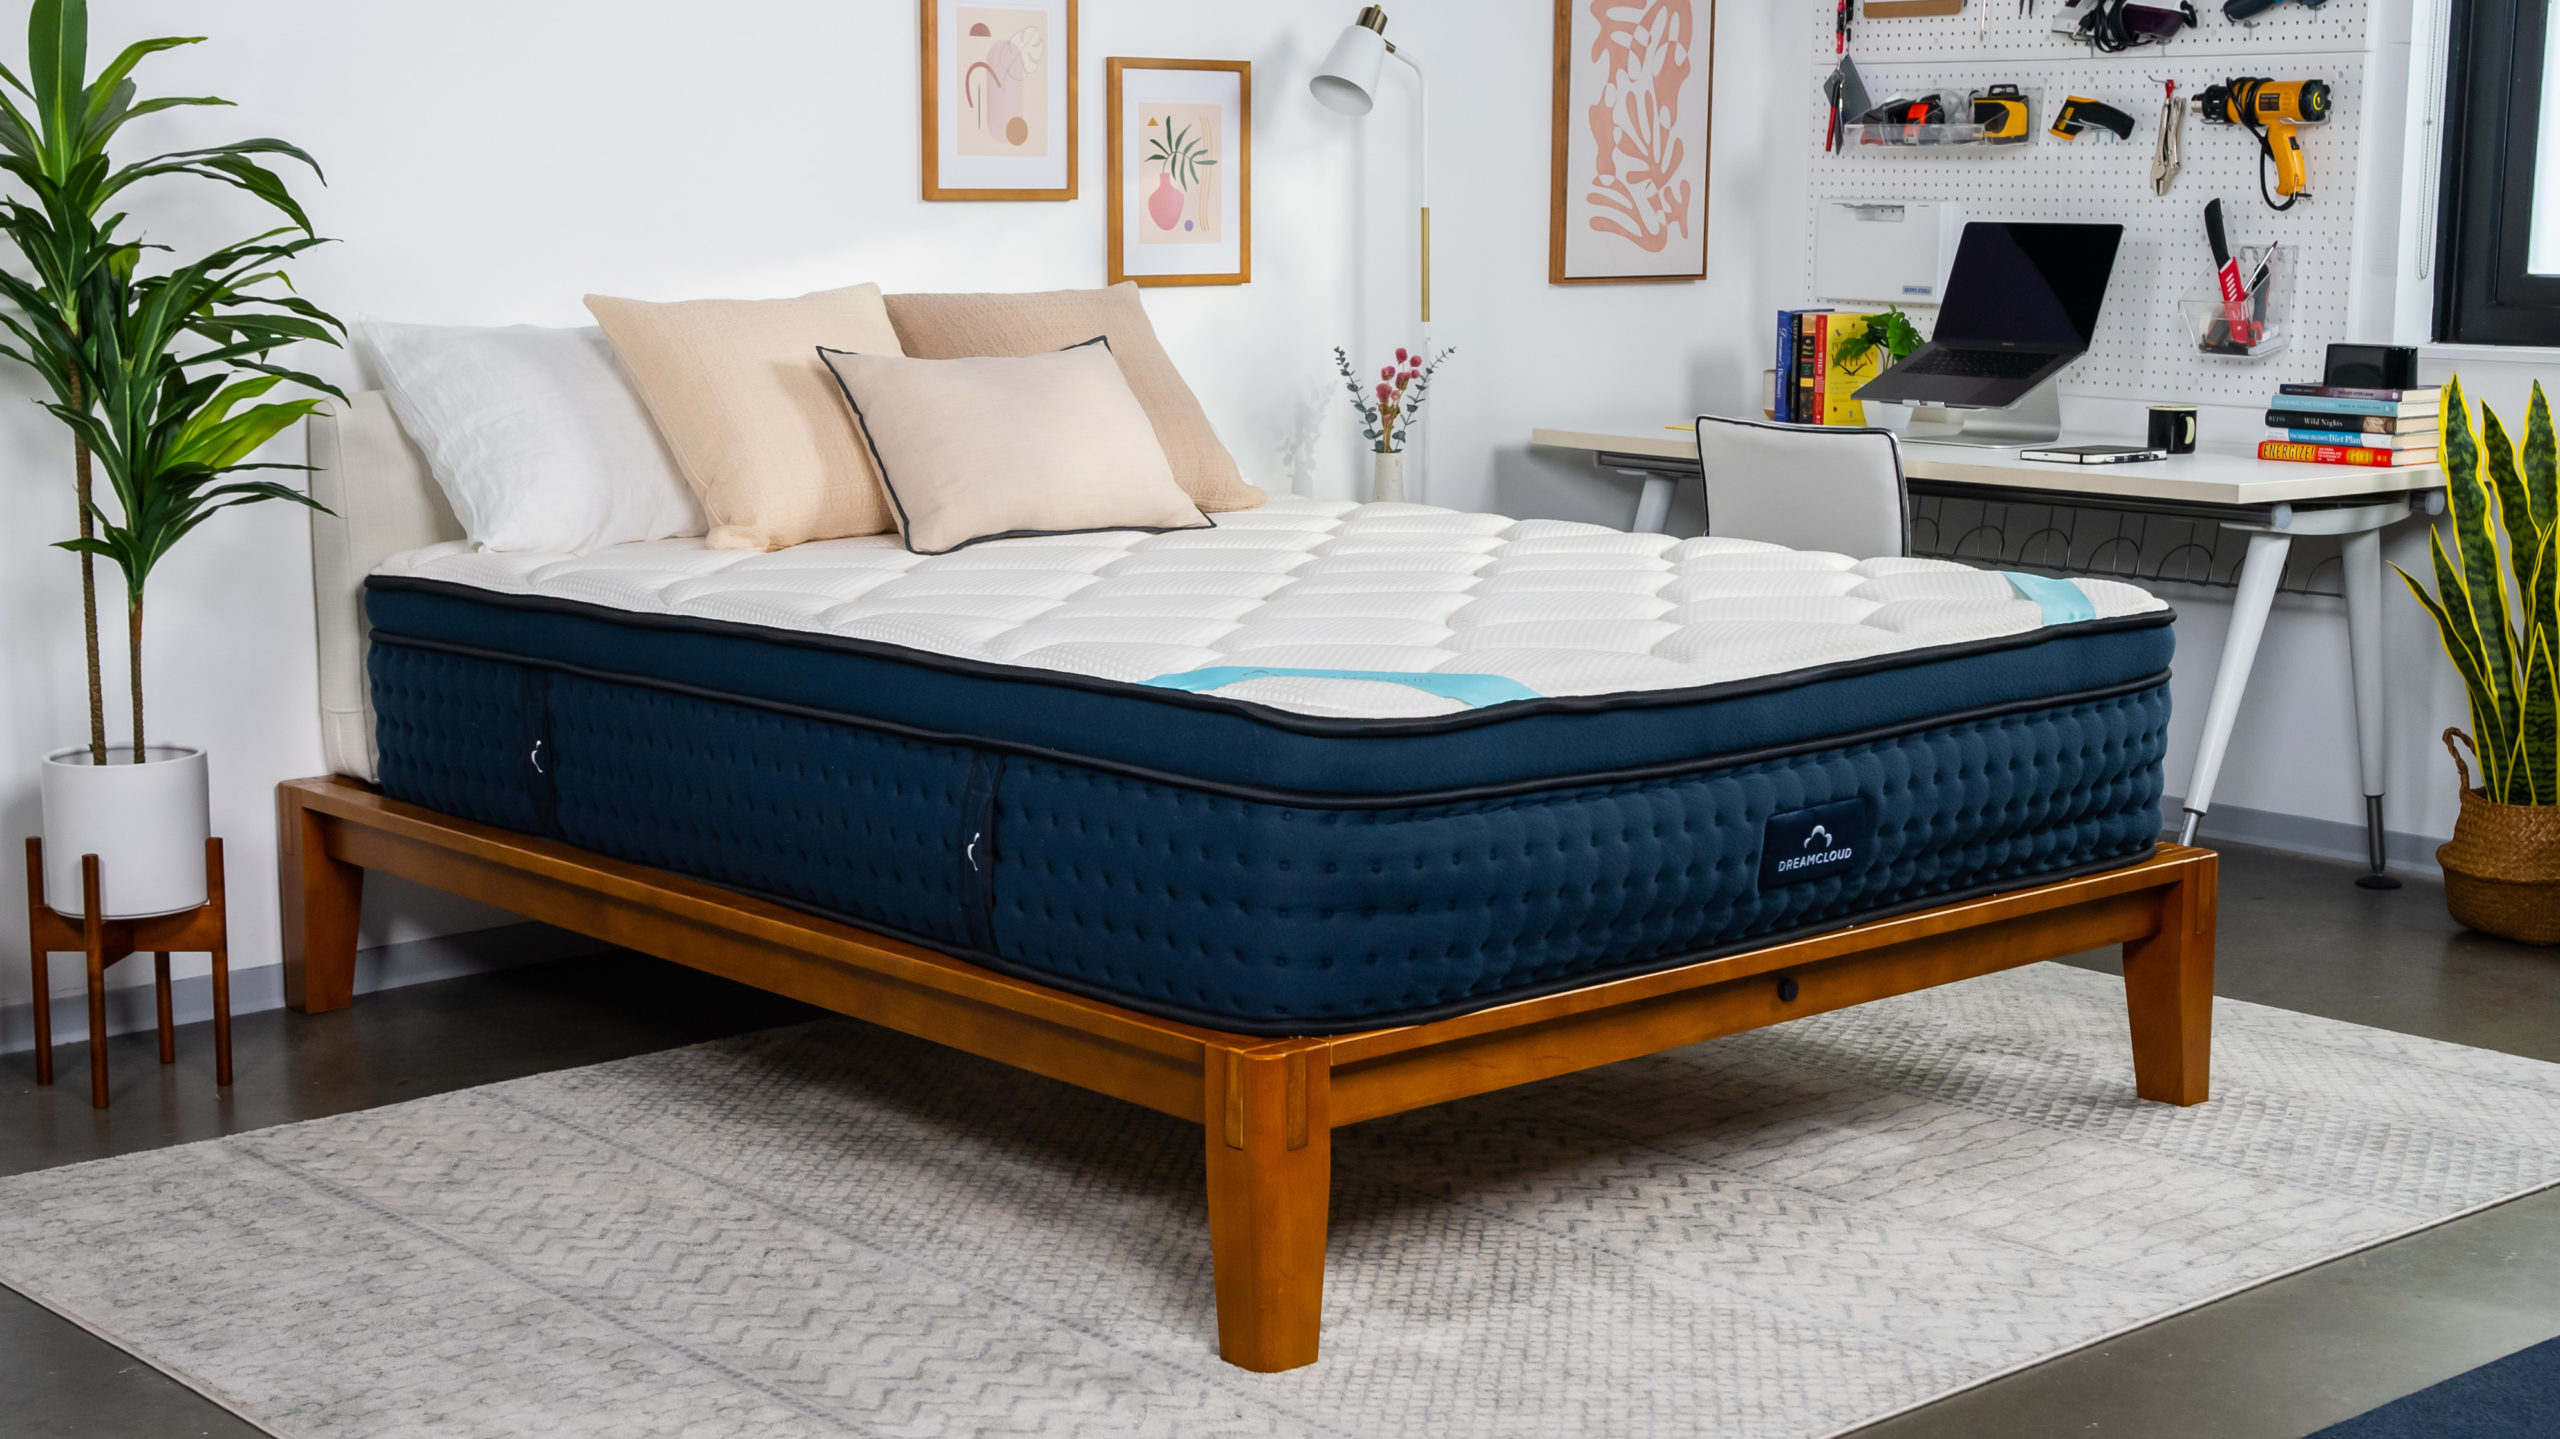 Why Does the Size of Your Mattress Impact Your Health